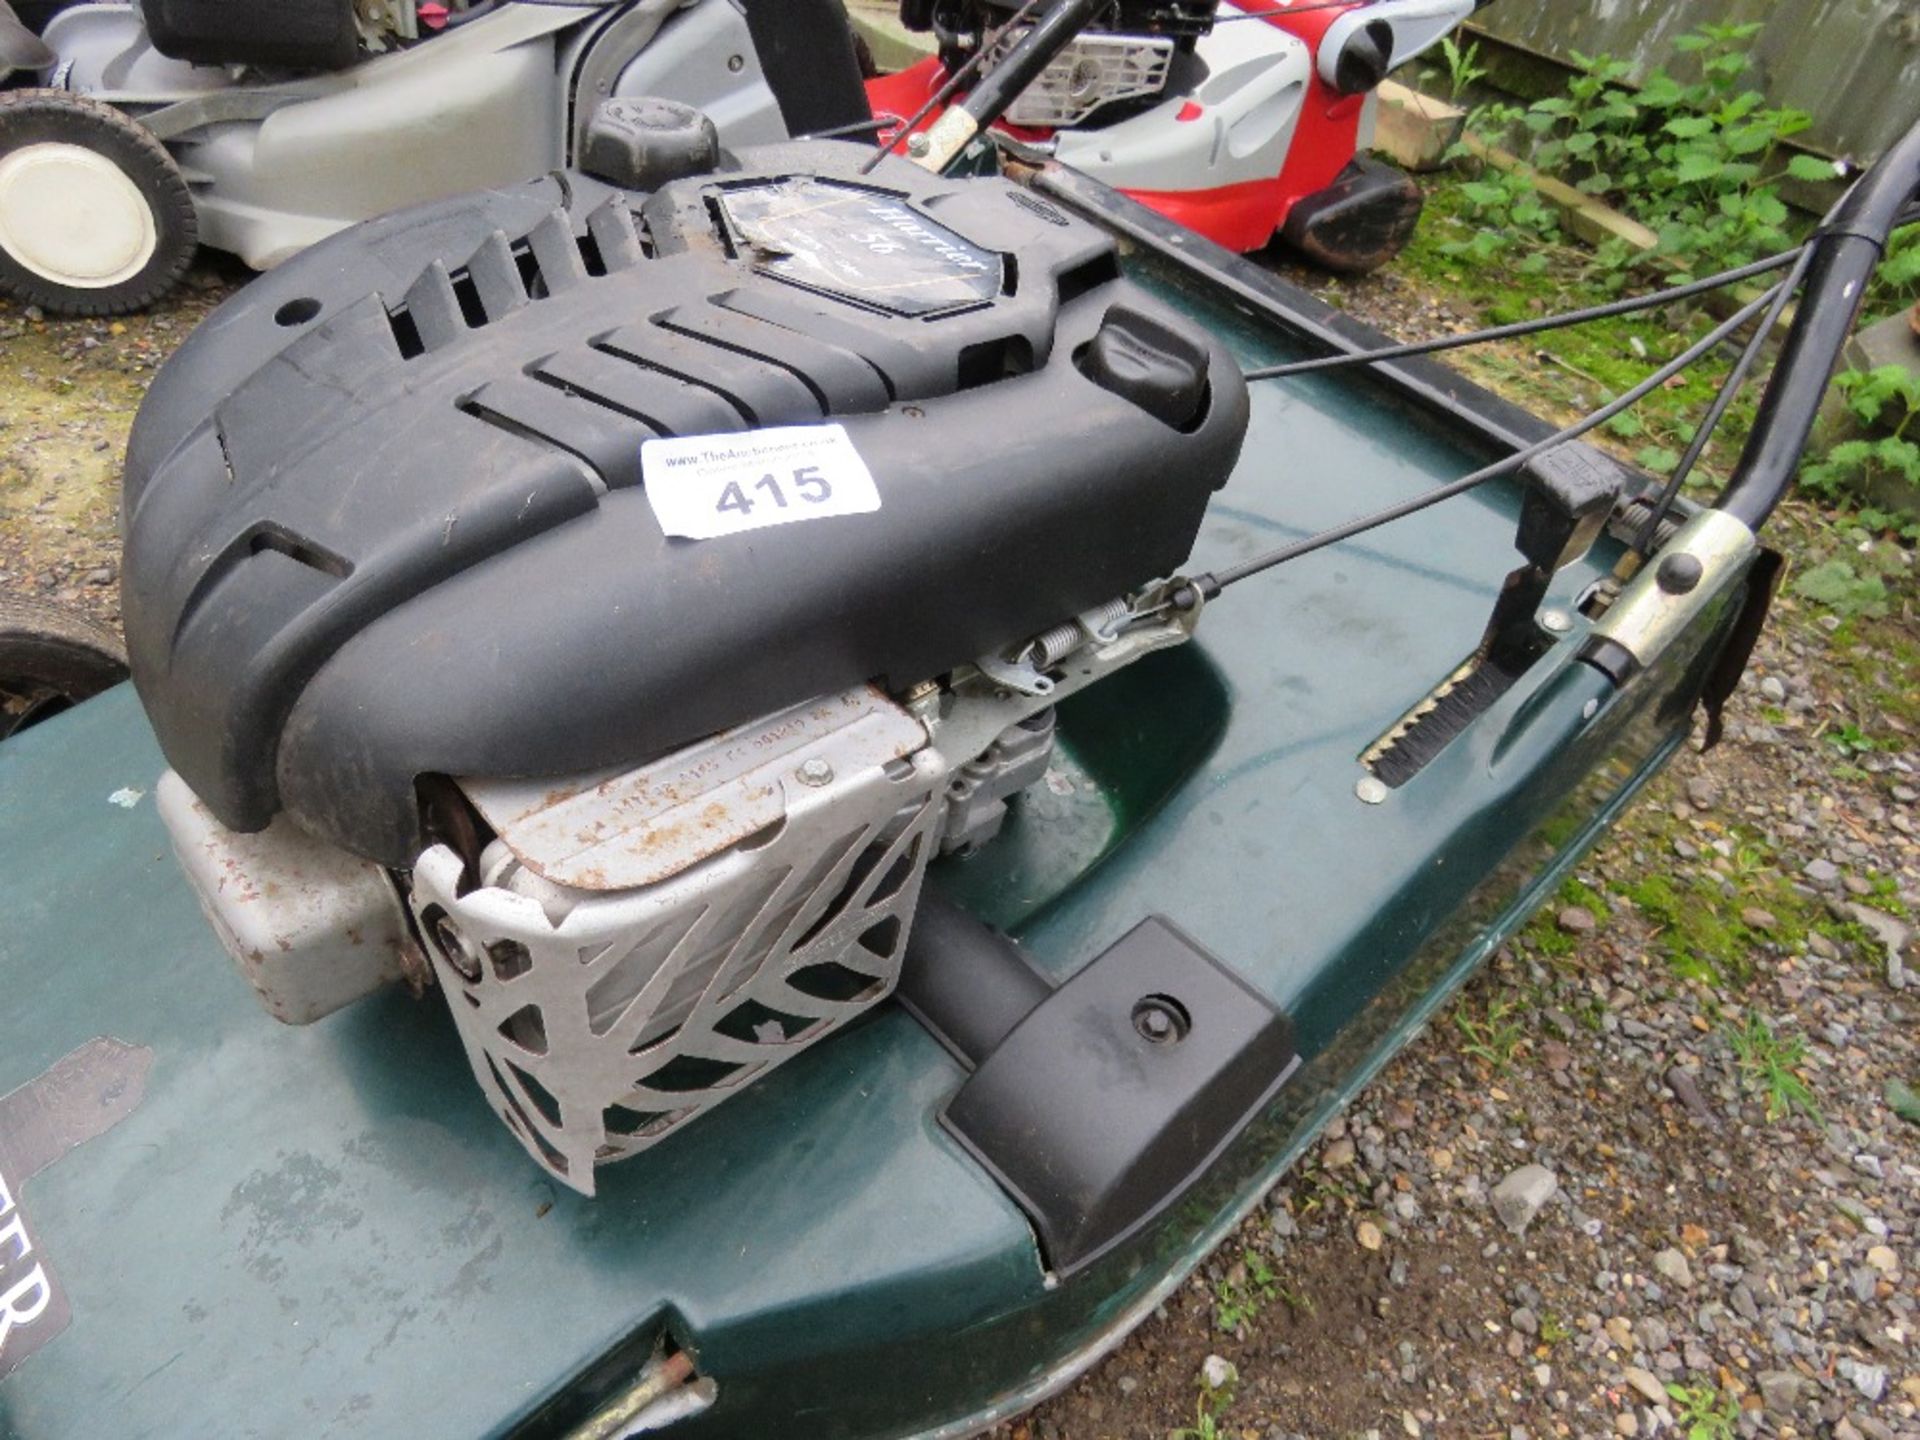 HAYTER HARRIER 56 PETROL ENGINE ROLLER MOWER, NO COLLECTOR.....THIS LOT IS SOLD UNDER THE AUCTIONEER